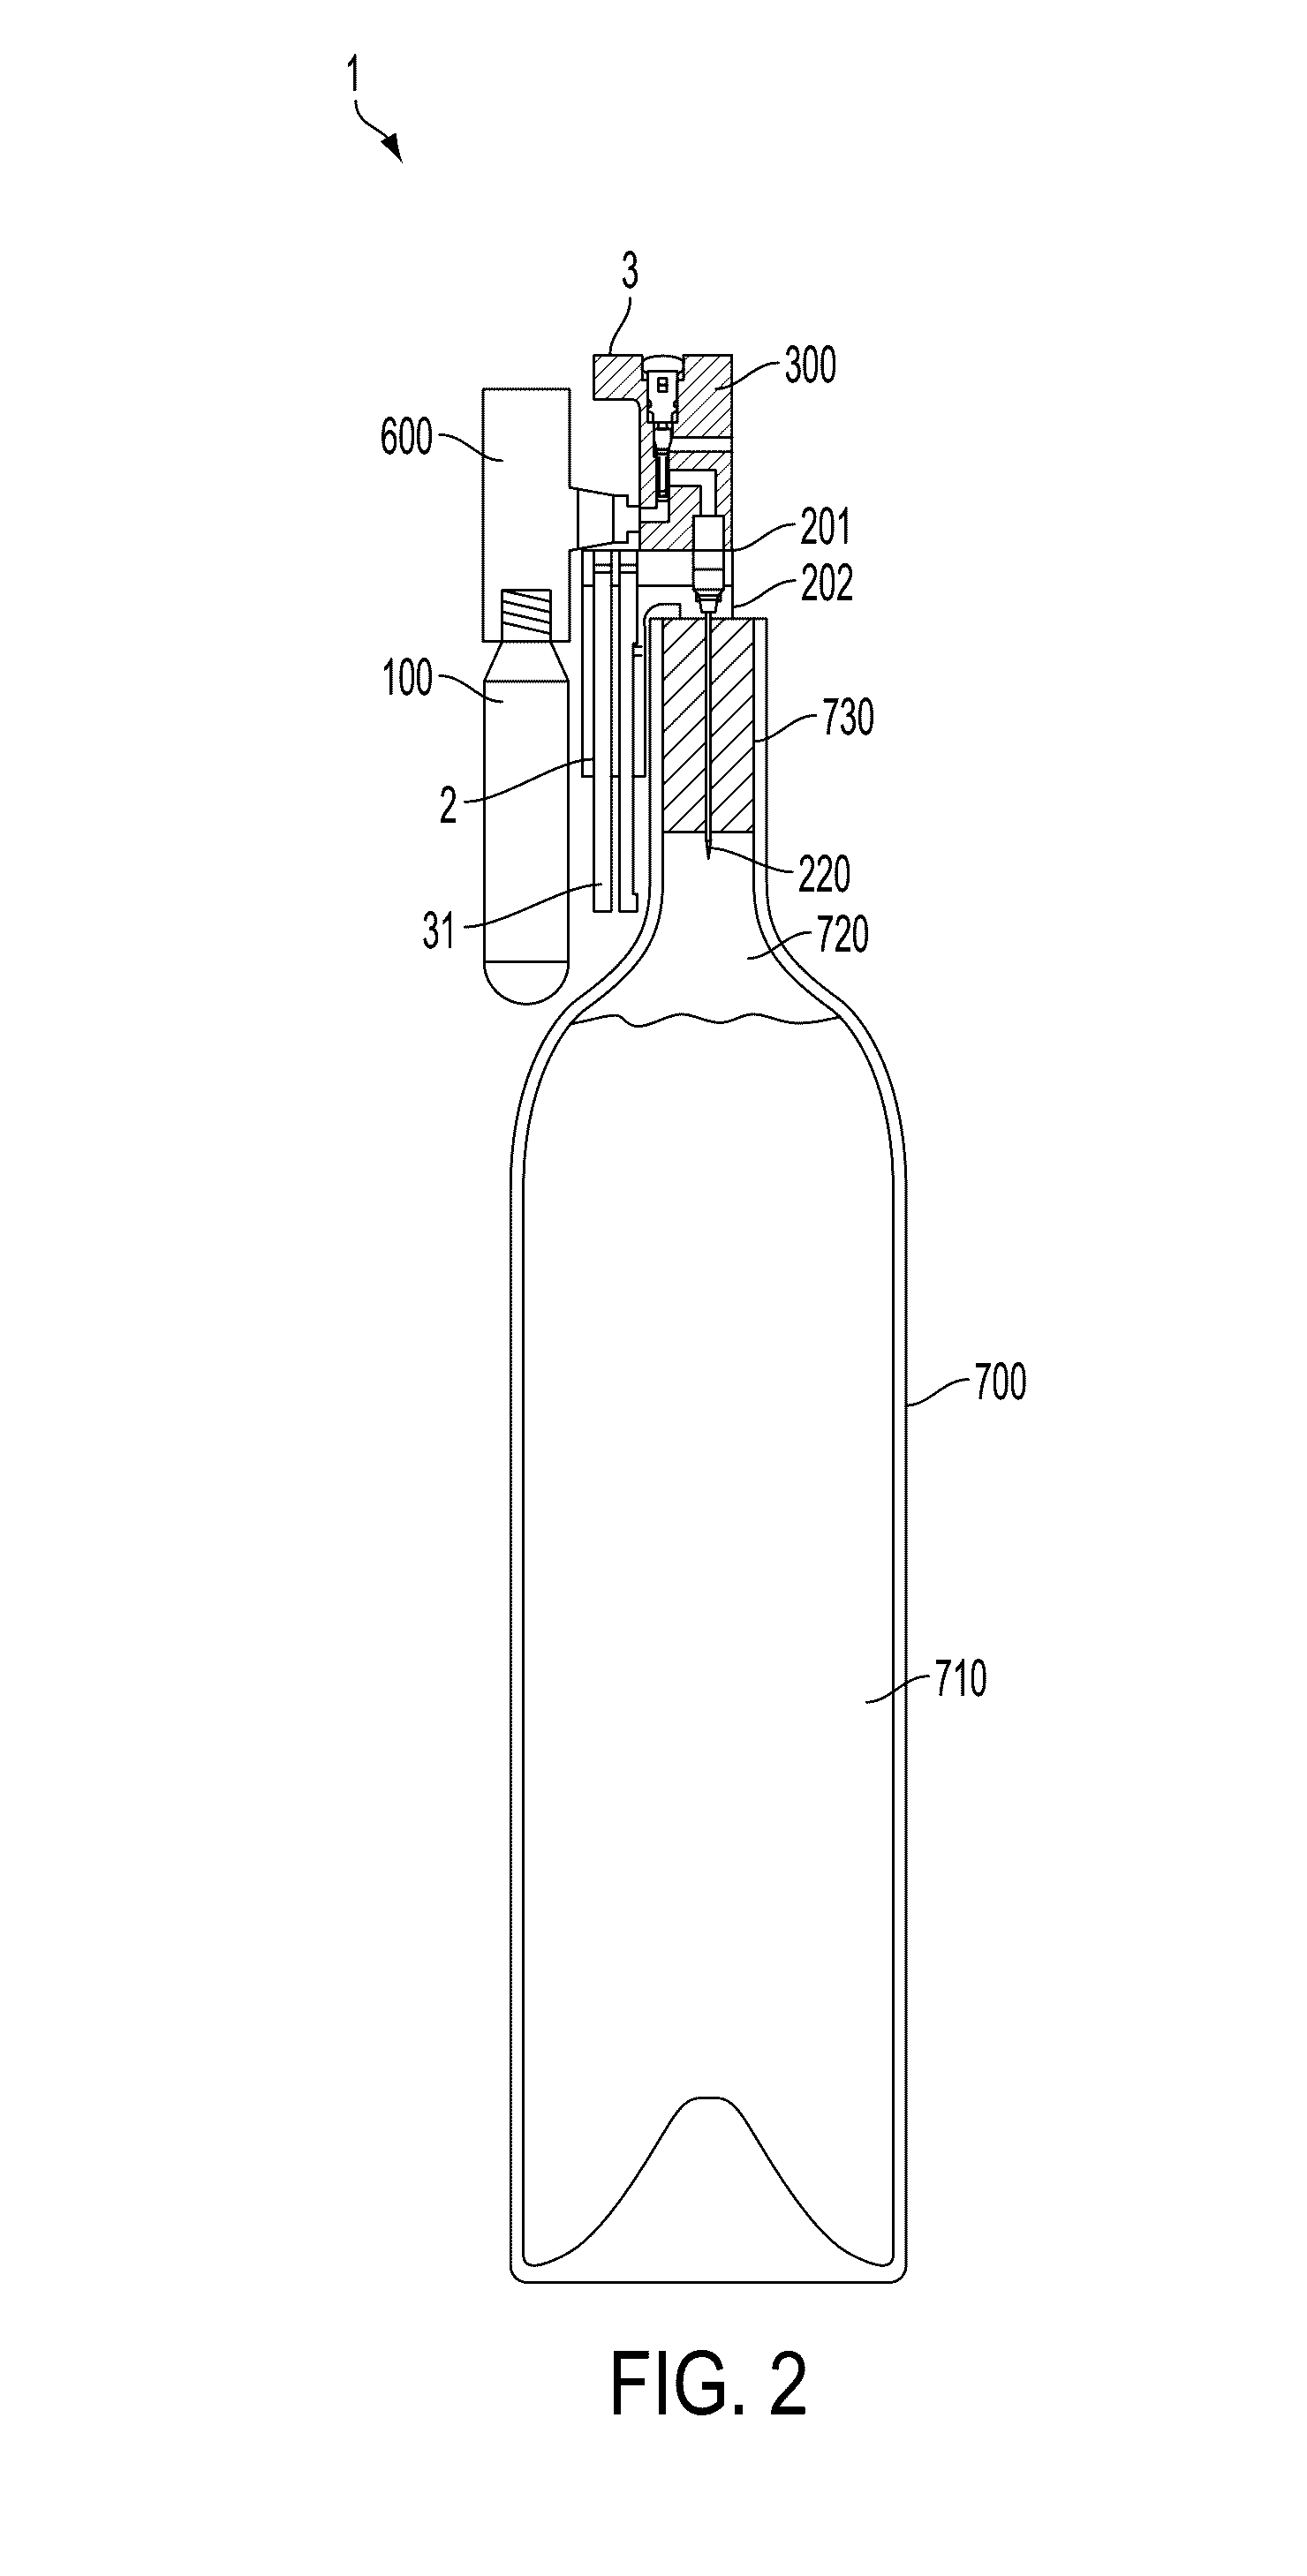 Method for extracting beverage from a bottle